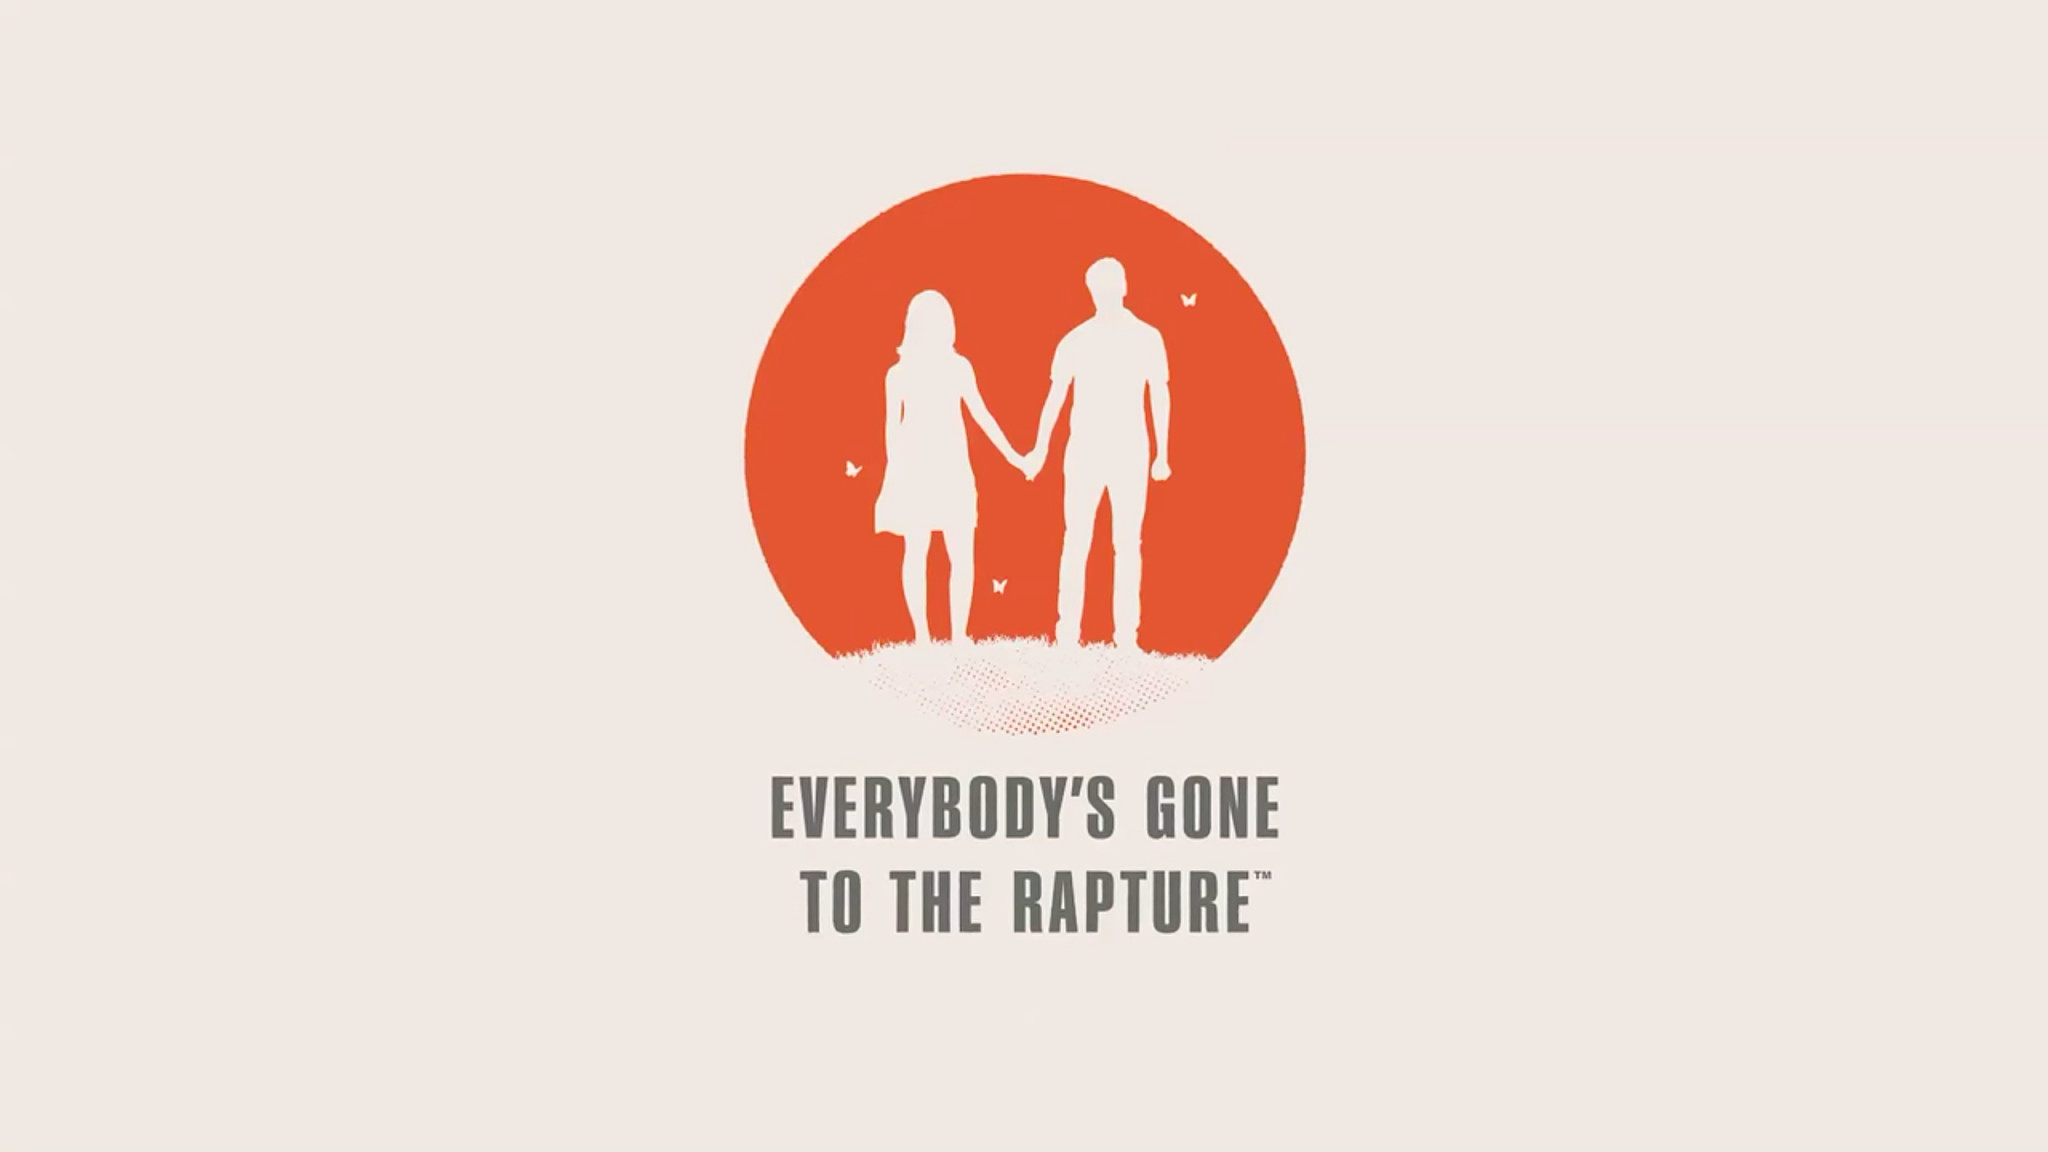 2048x1152 Everybody's Gone to the Rapture Wallpapers Everybody's Gone to the Rapture  widescreen wallpapers